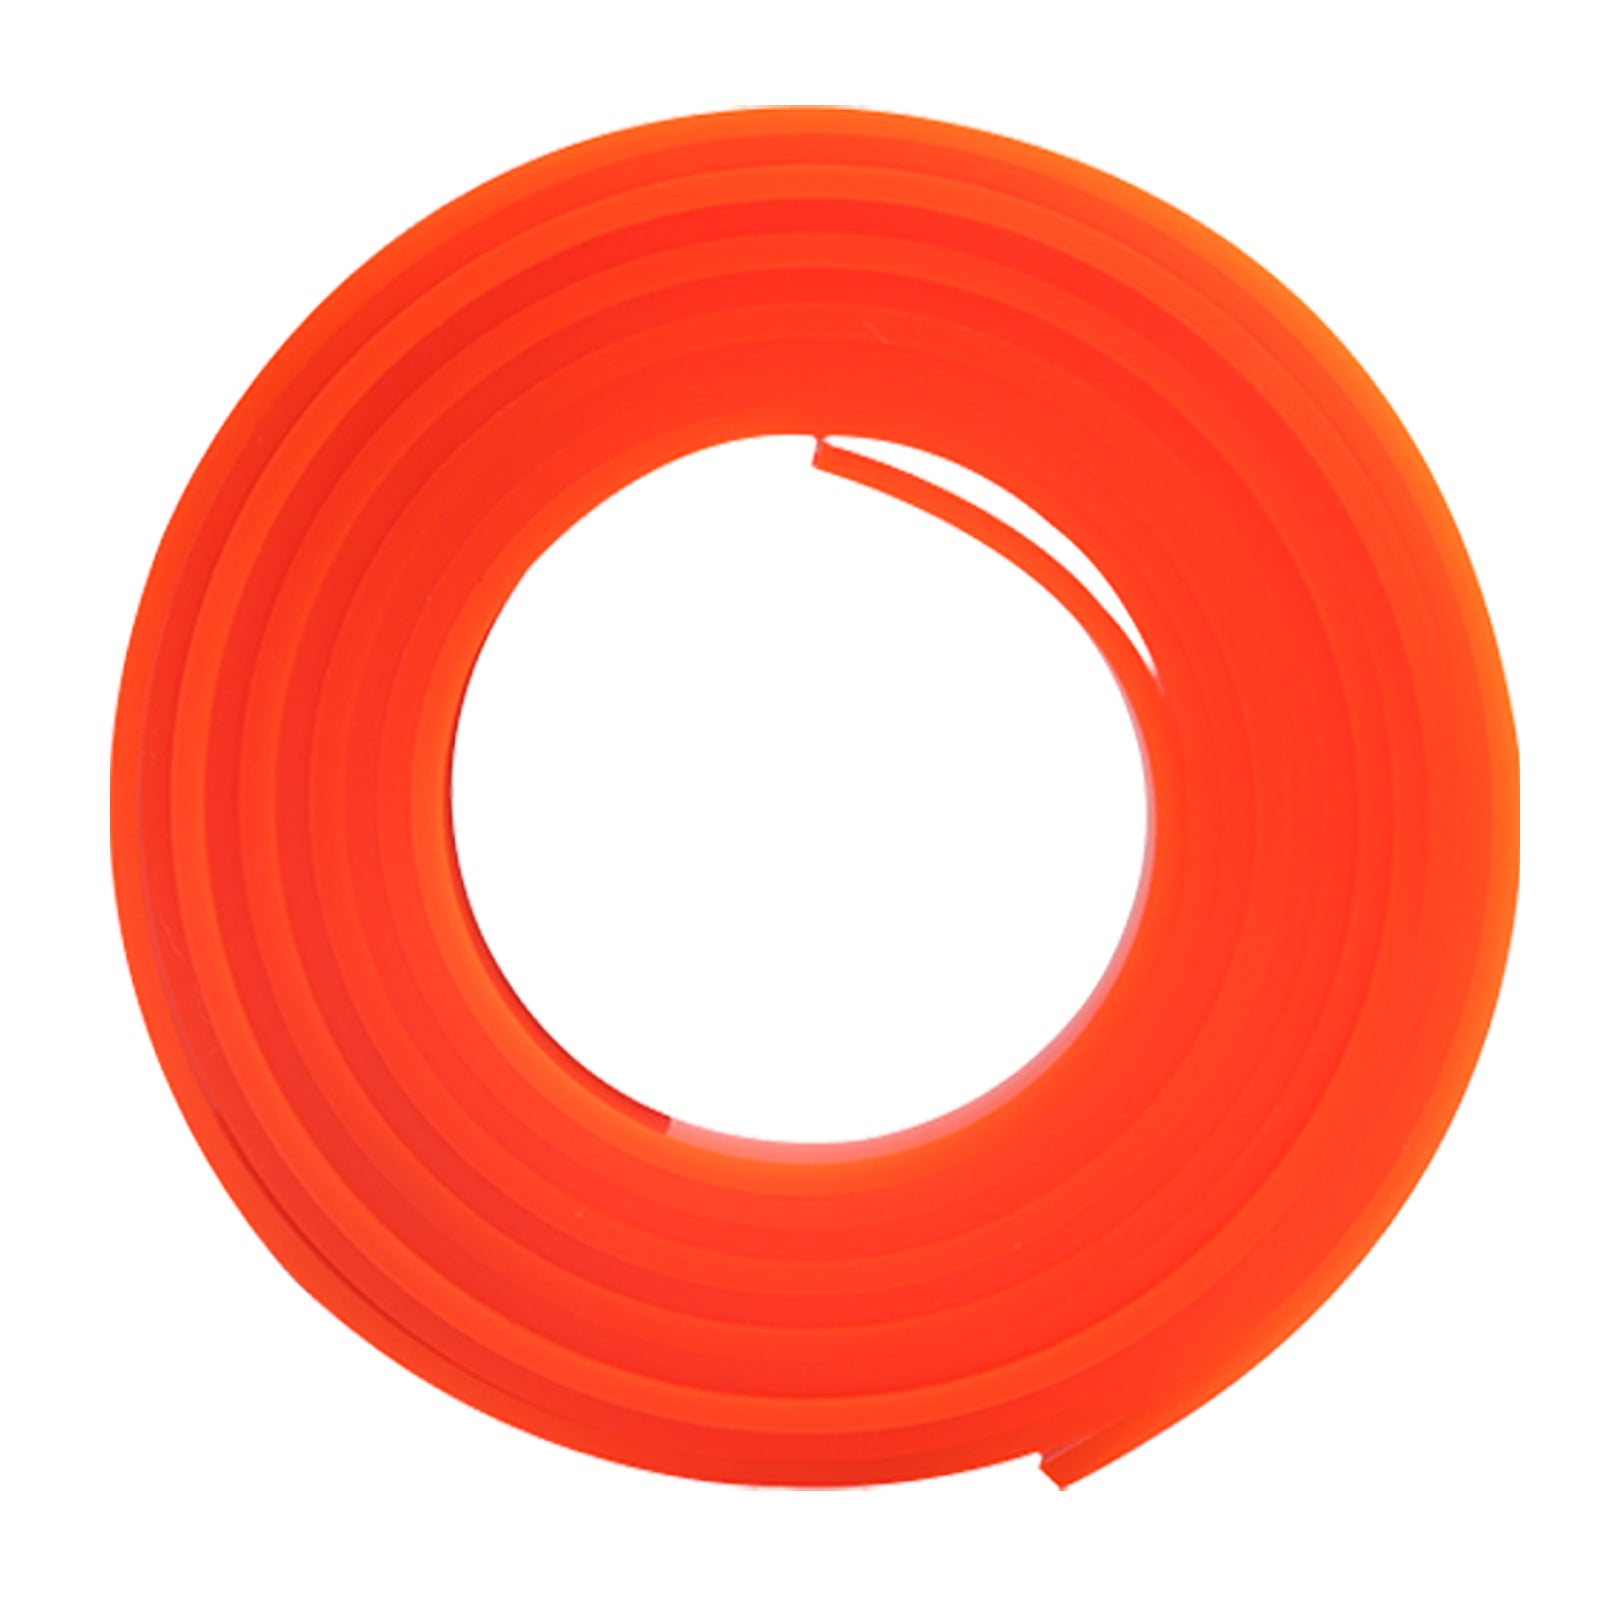 Orange Fusion Squeegee Channel Refill roll displayed alone, showcasing its high-quality cleaning capabilities.